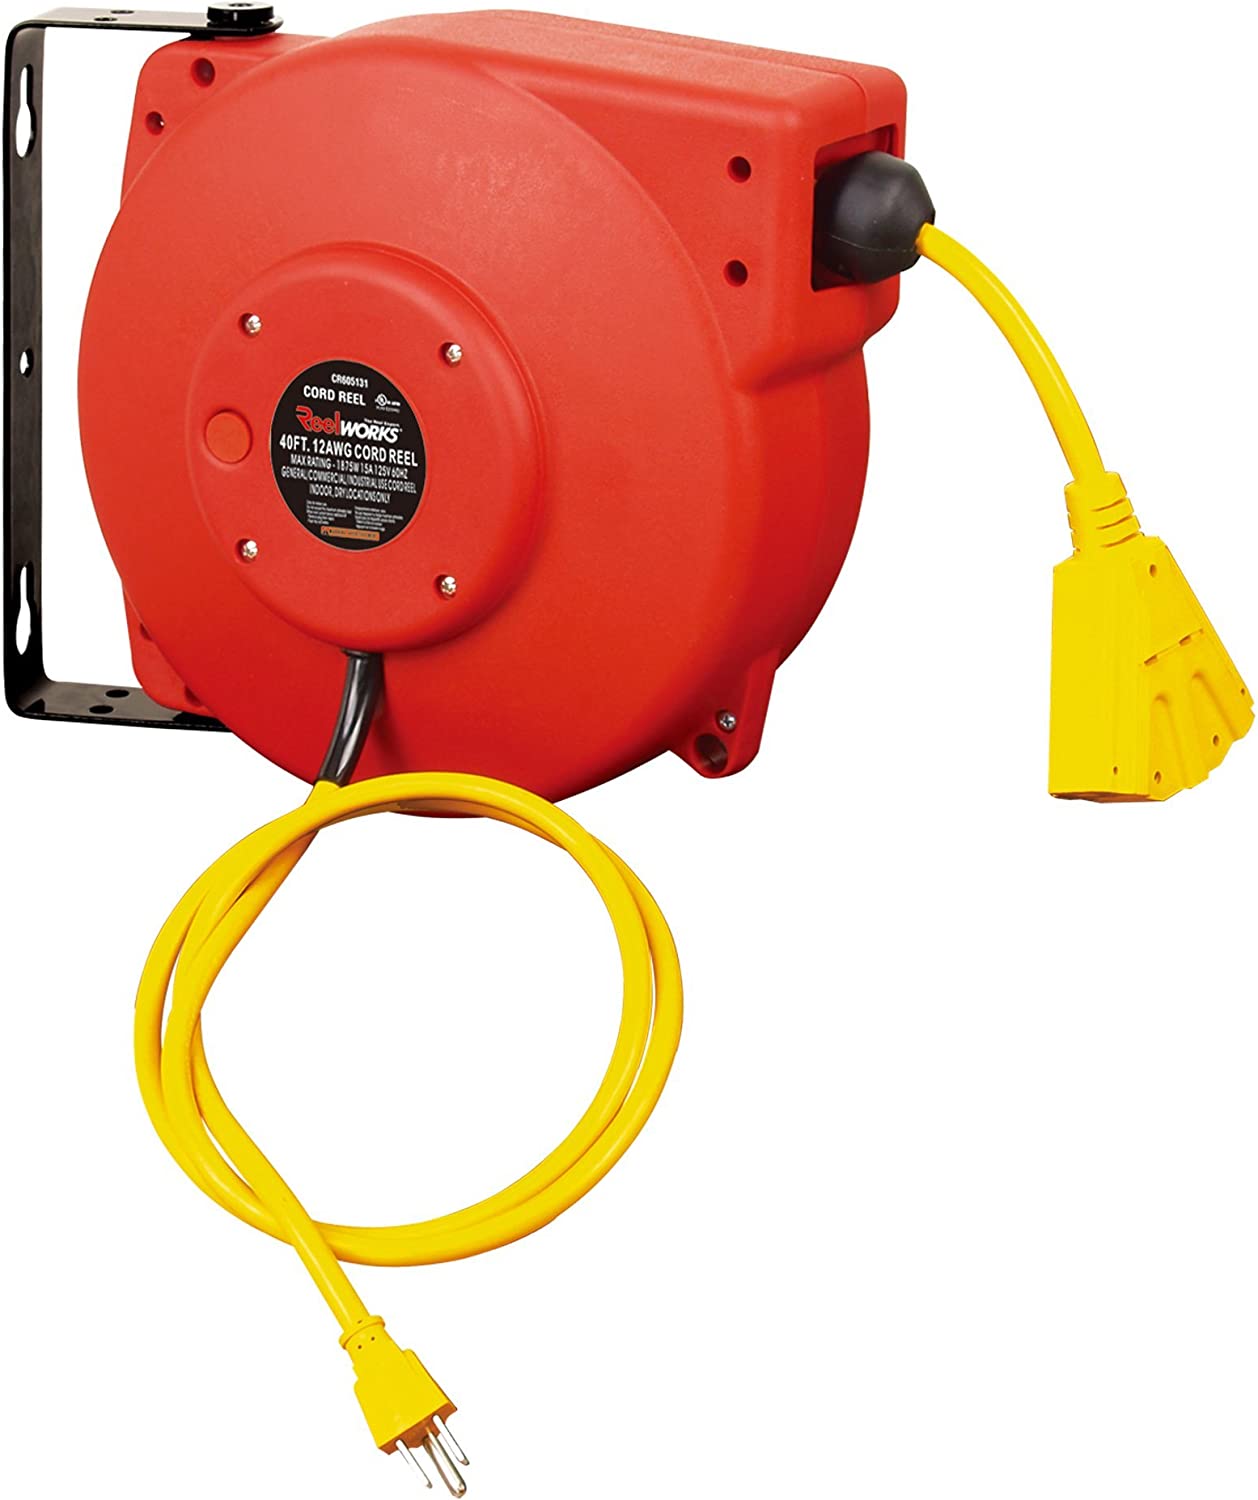 ReelWorks CR605131S3A 12 AWG x 40' 15 A 3 Grounded Outlets Retractable Extension Cord Reel New